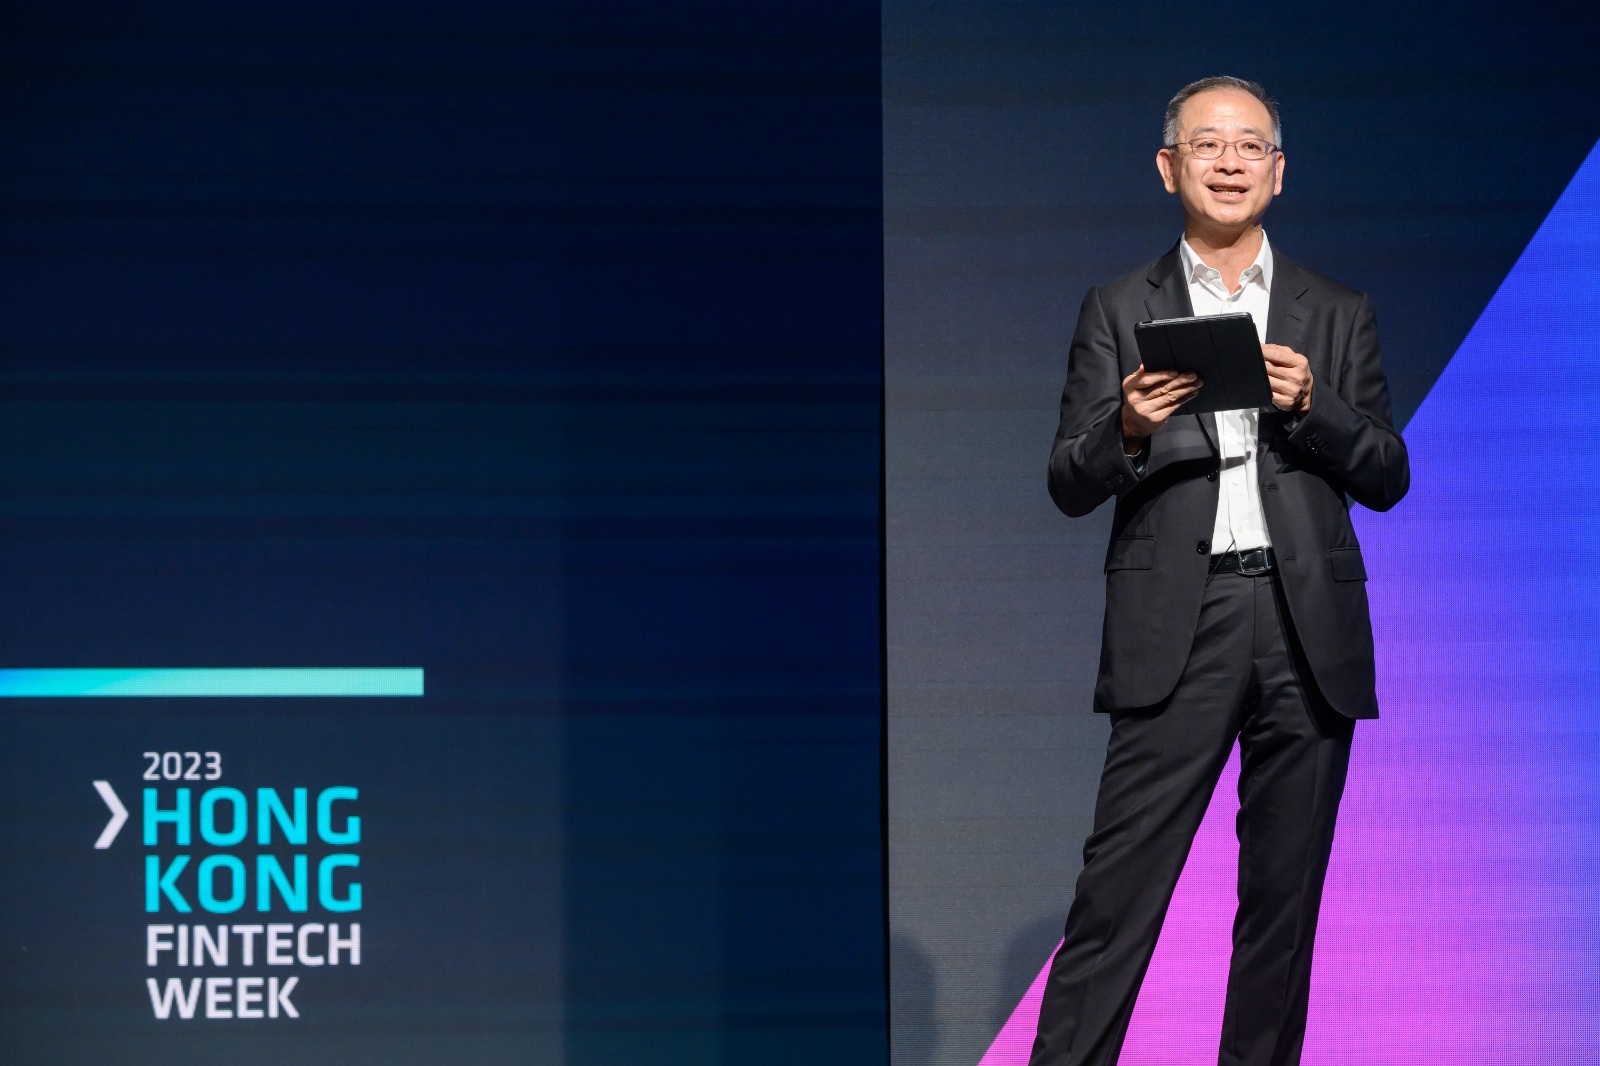 Mr Eddie Yue, Chief Executive of the Hong Kong Monetary Authority, delivers the opening keynote at the Hong Kong FinTech Week 2023.